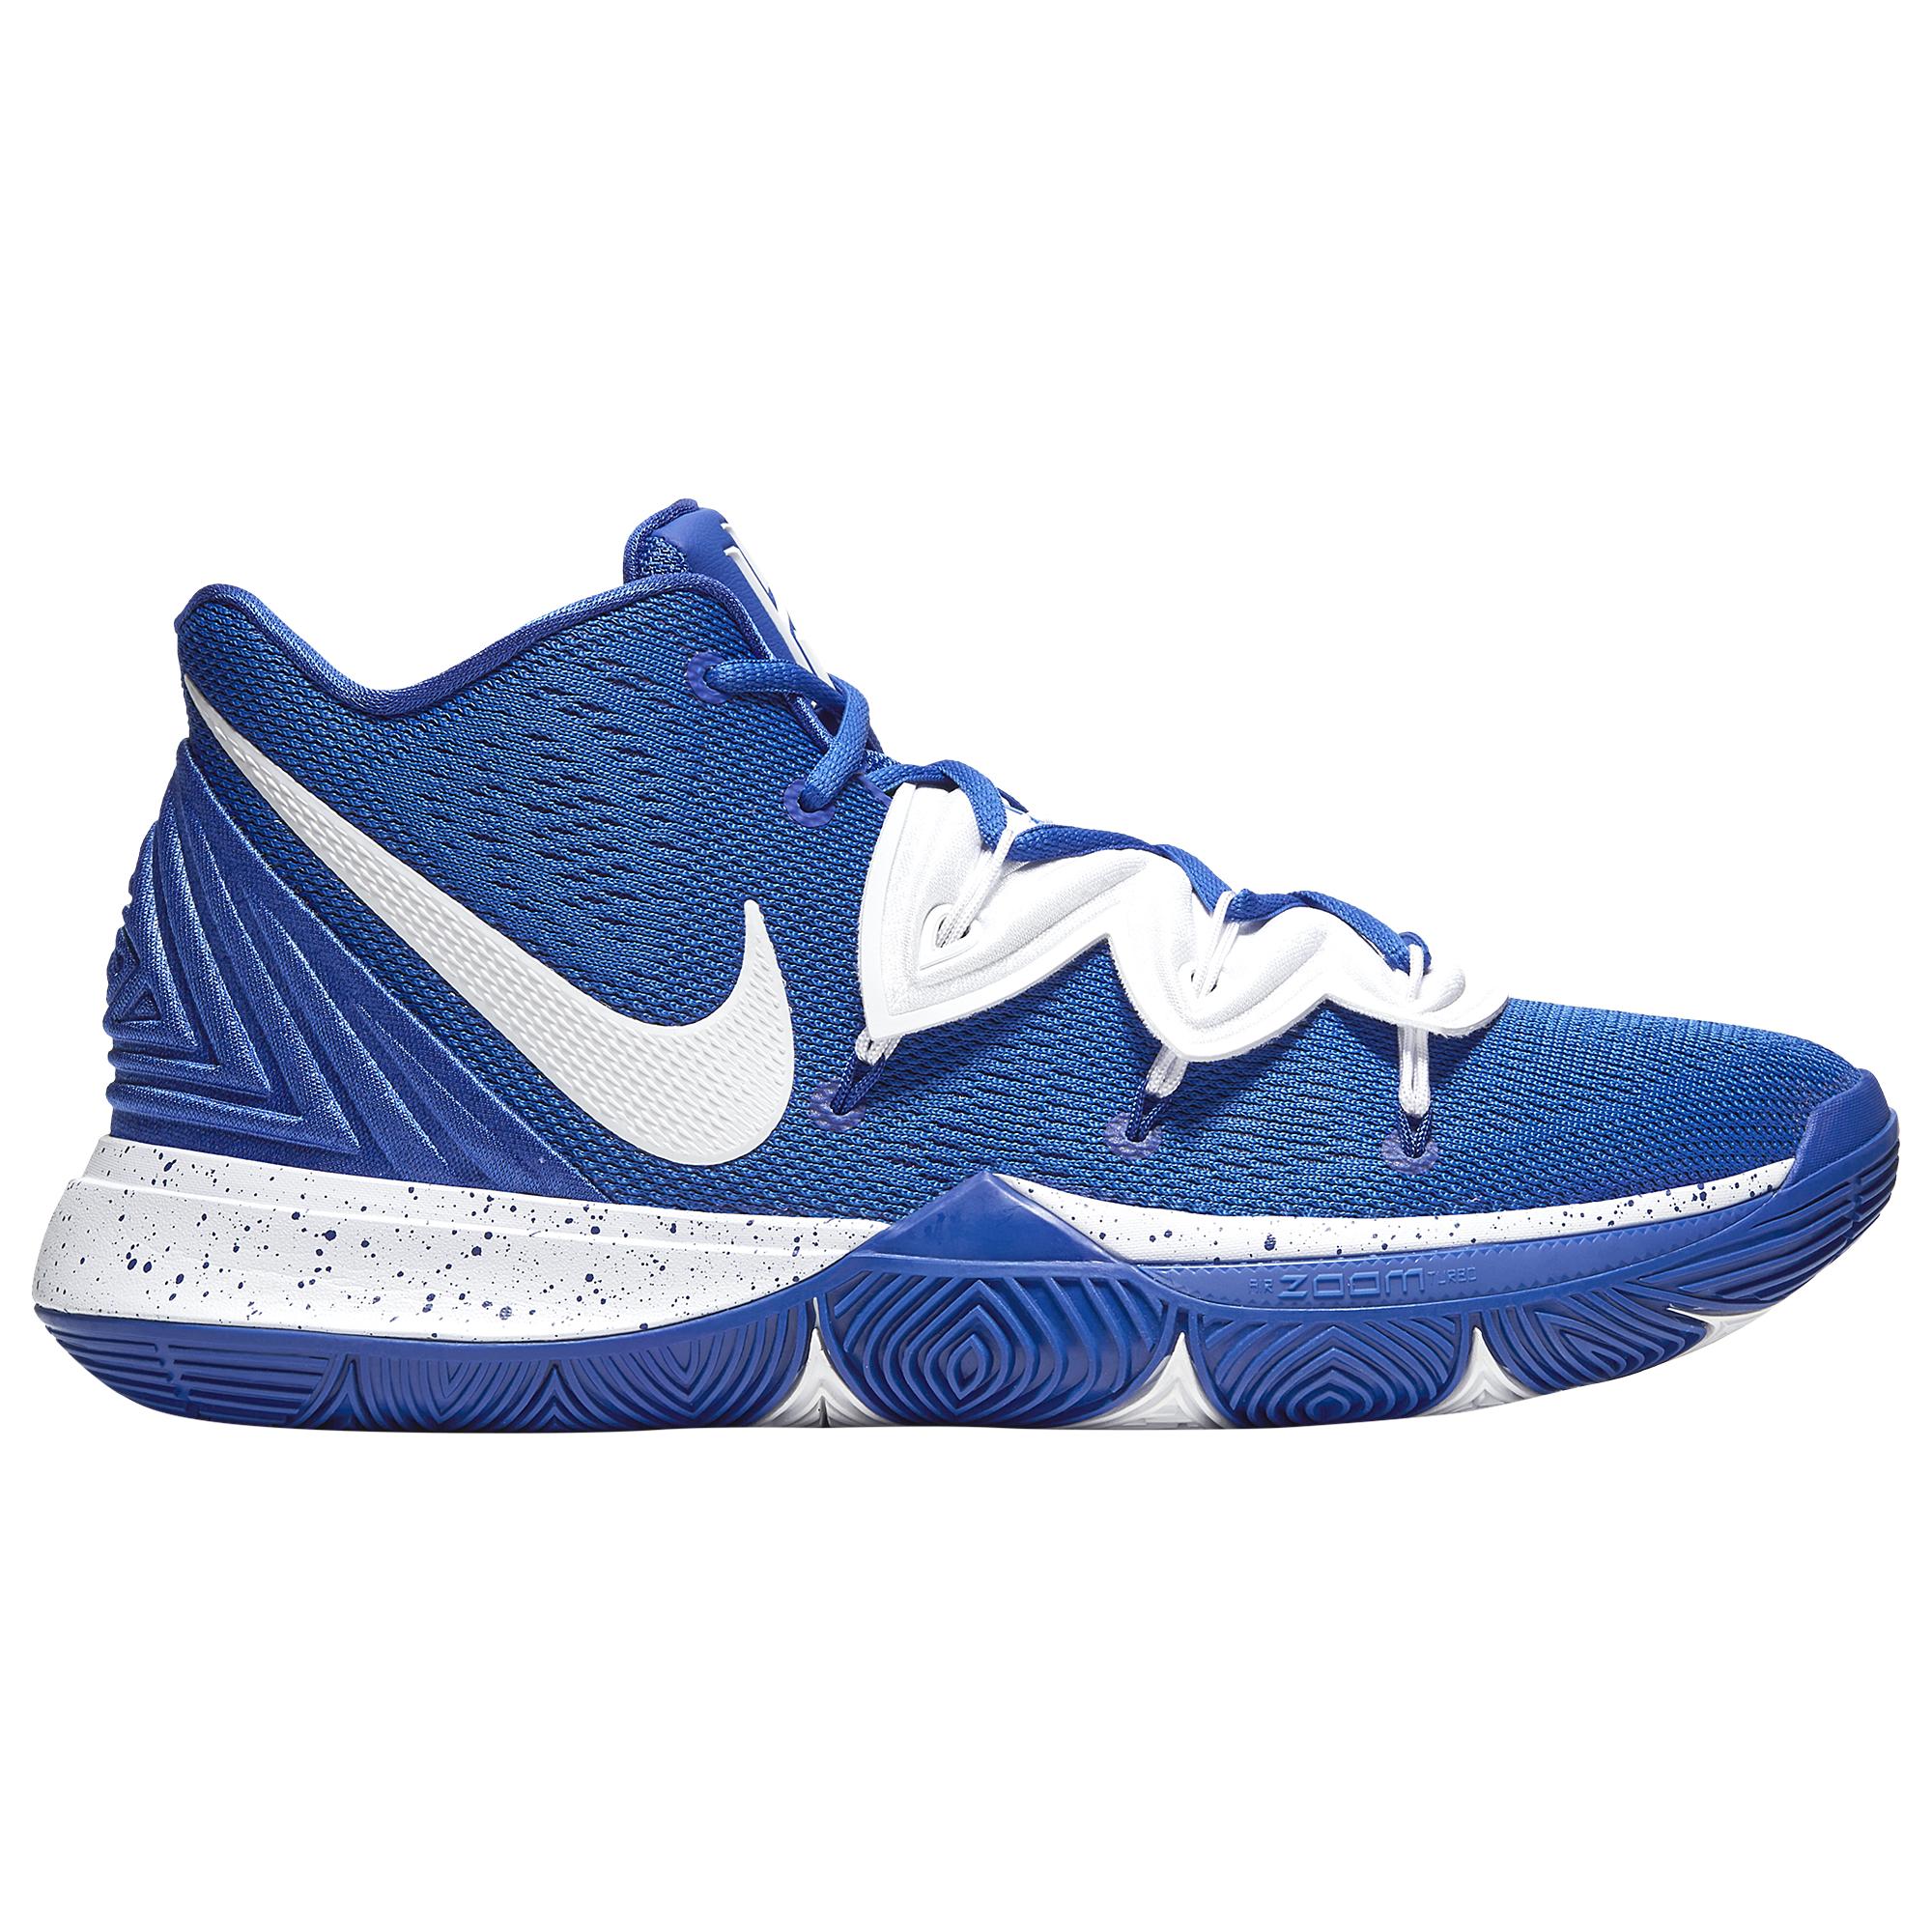 Nike Rubber Kyrie 5 in Blue/White (Blue 